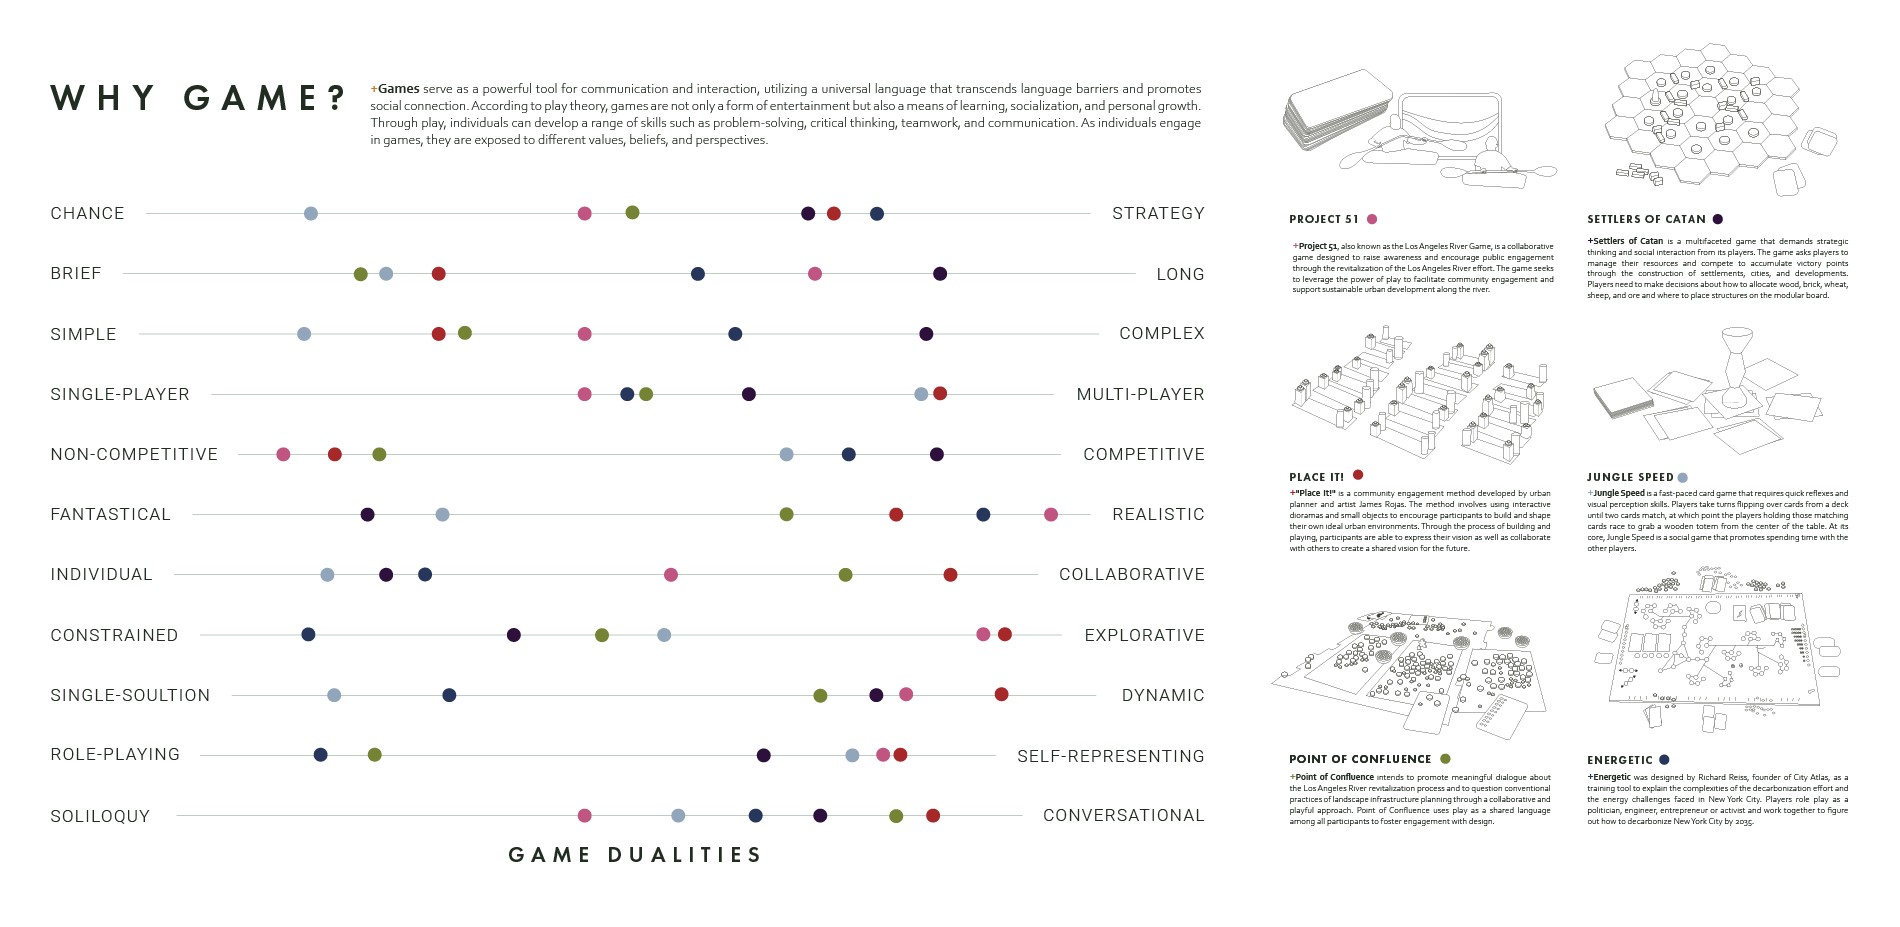 All Games Exist within a Spectrum of Dualities